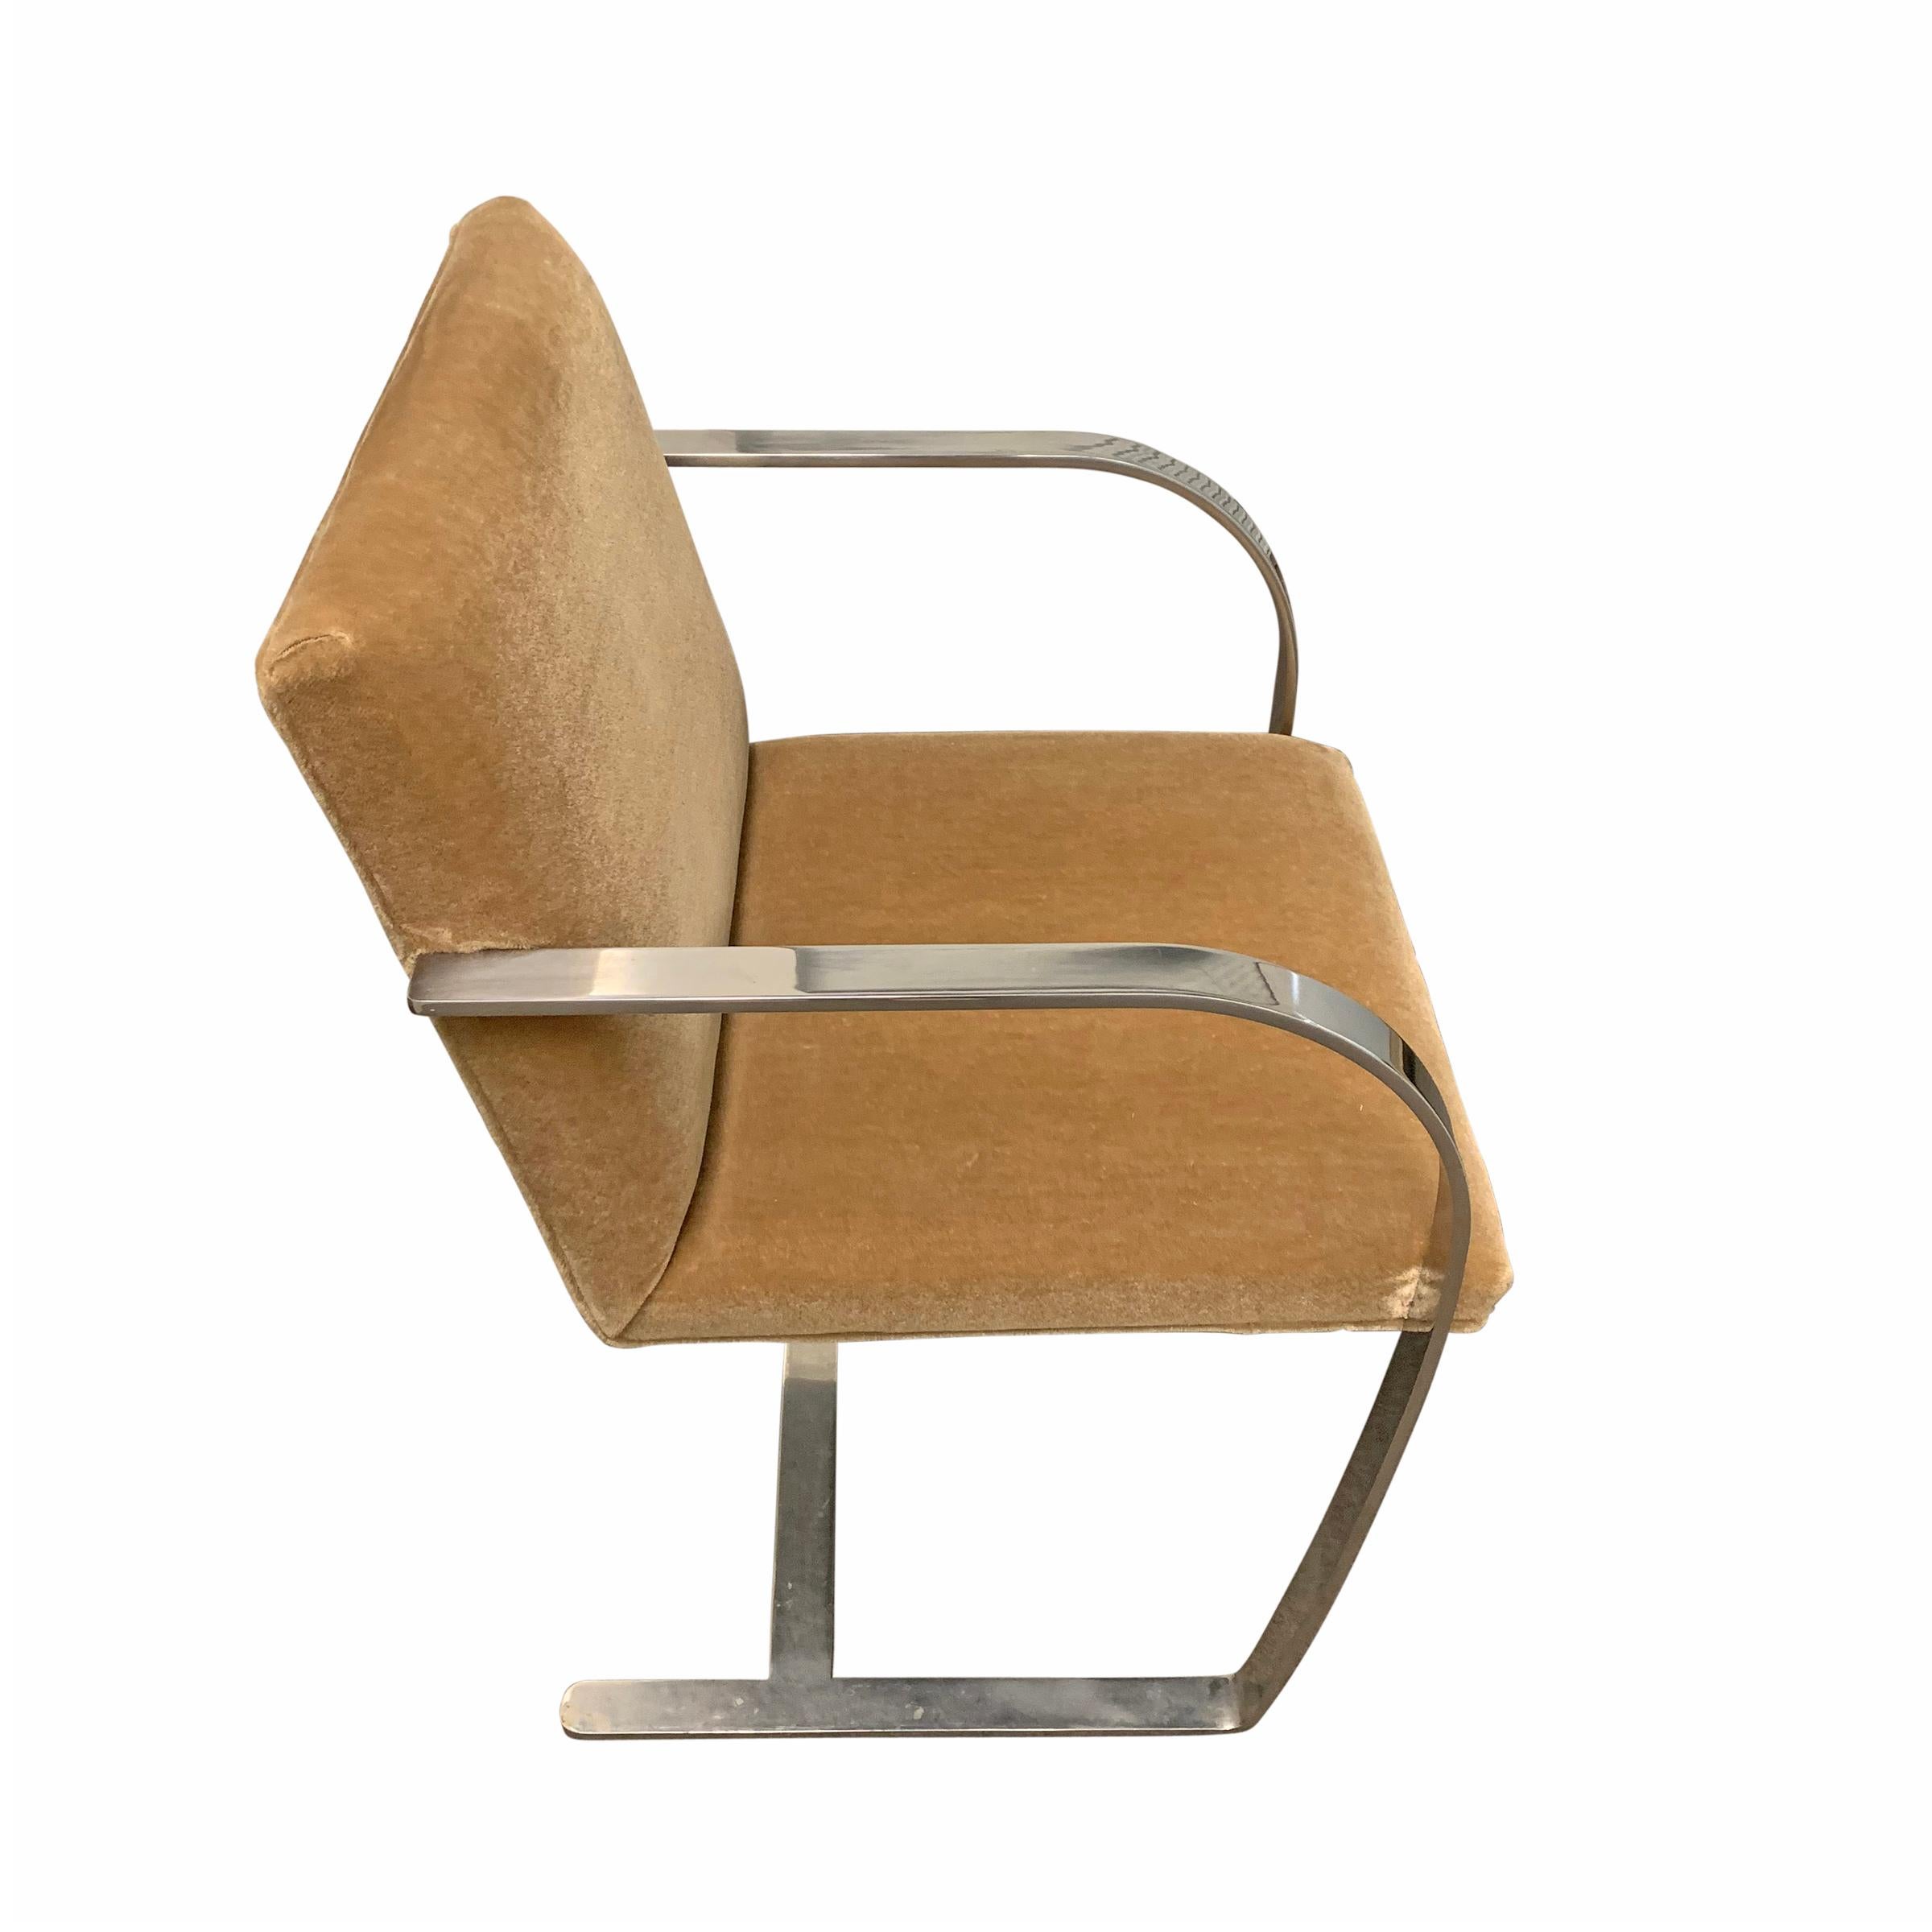 20th Century Pair of Brno Chairs by Mies van der Rohe